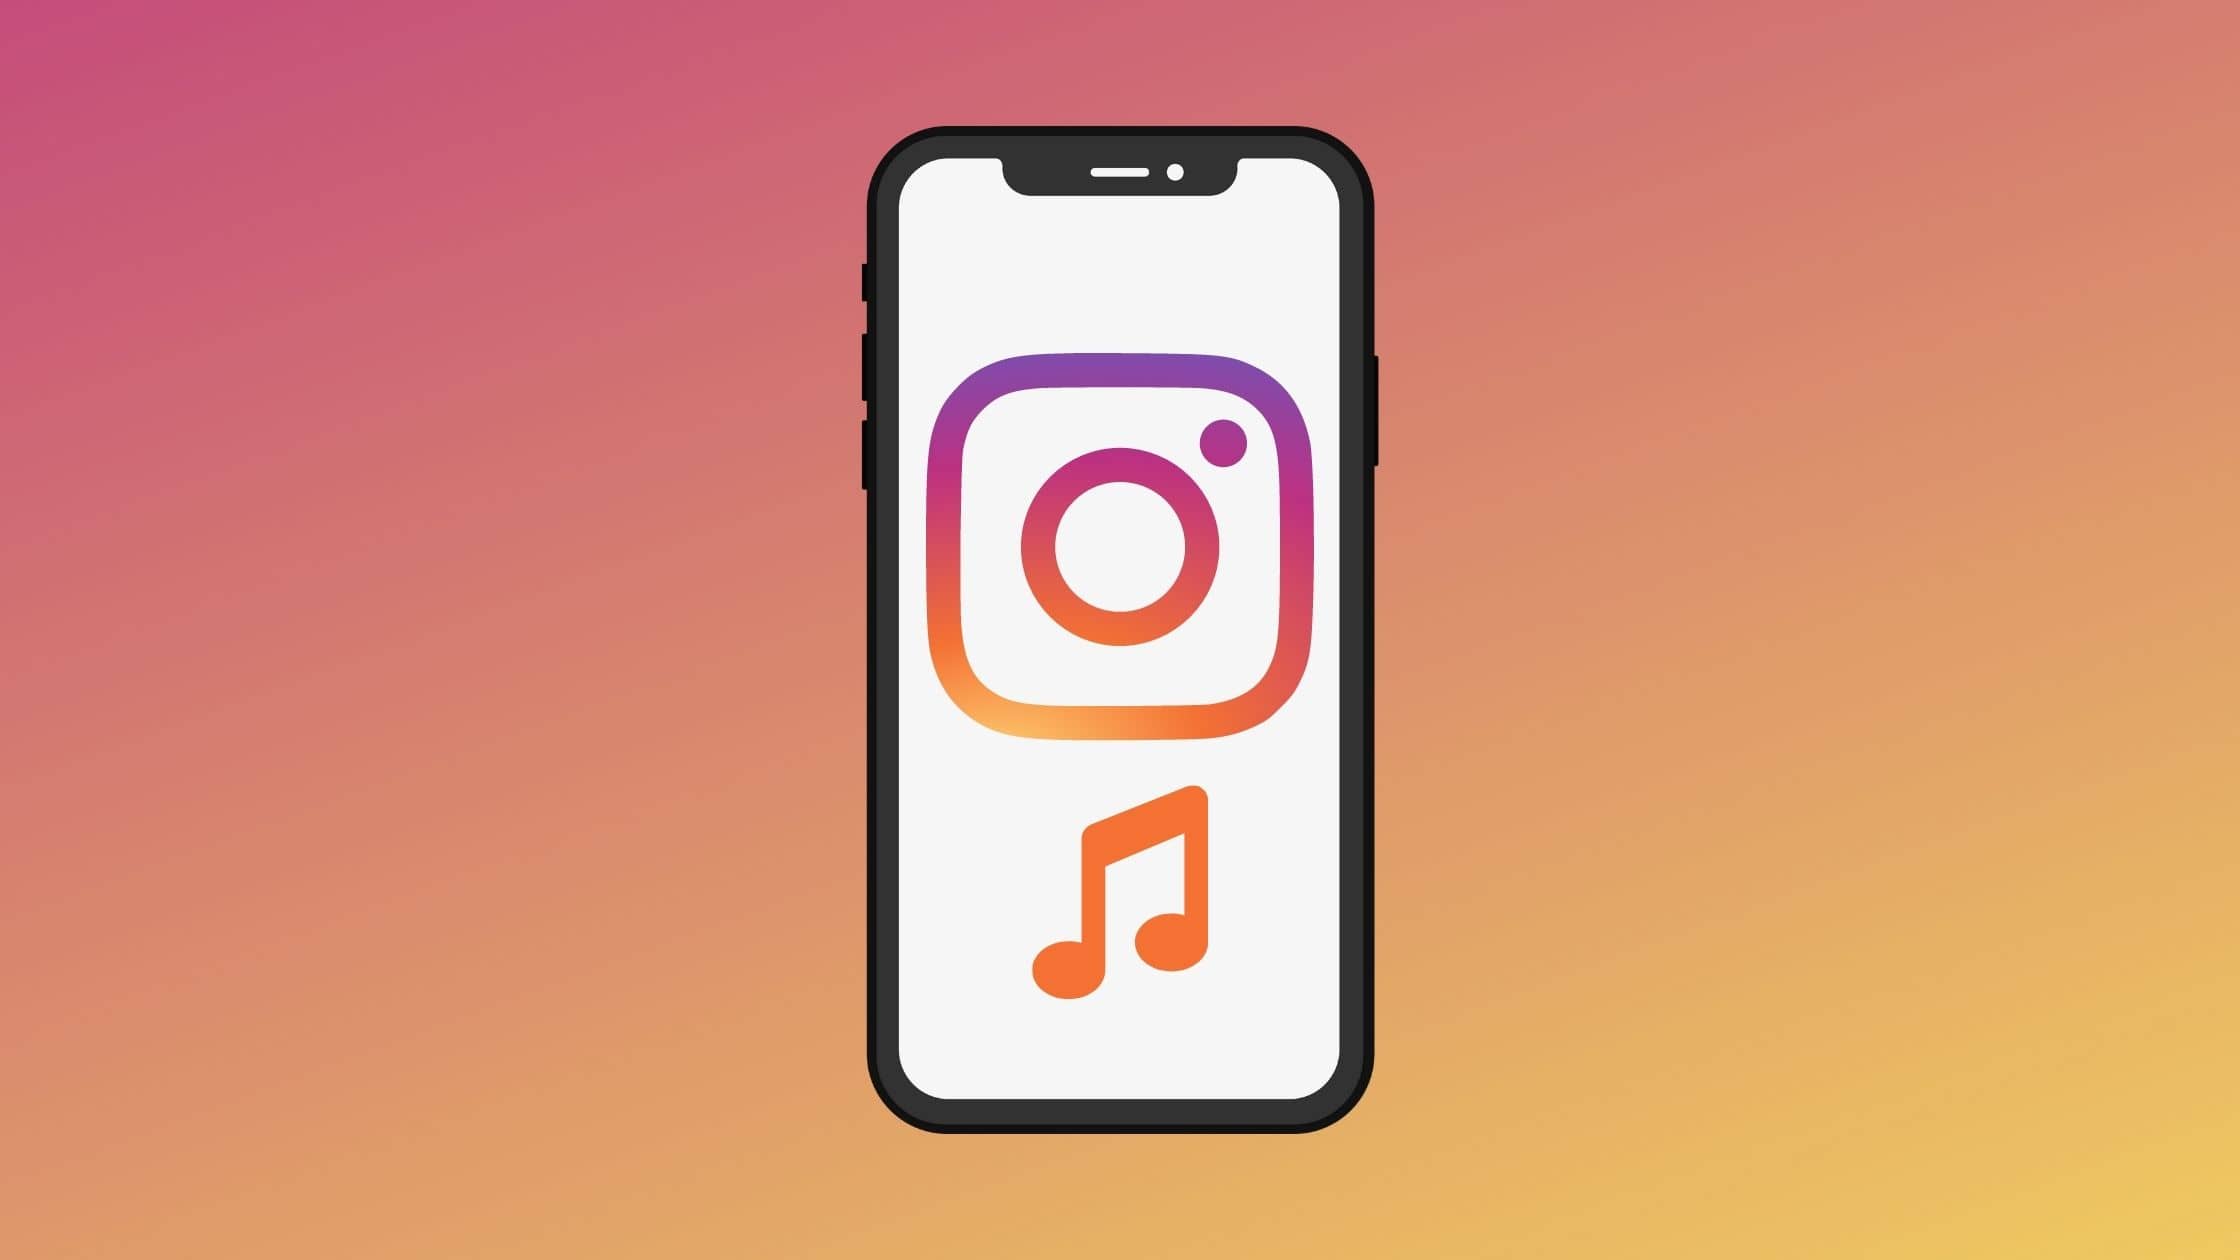 How to Add Music To Instagram Feed Posts Including Photos and Videos